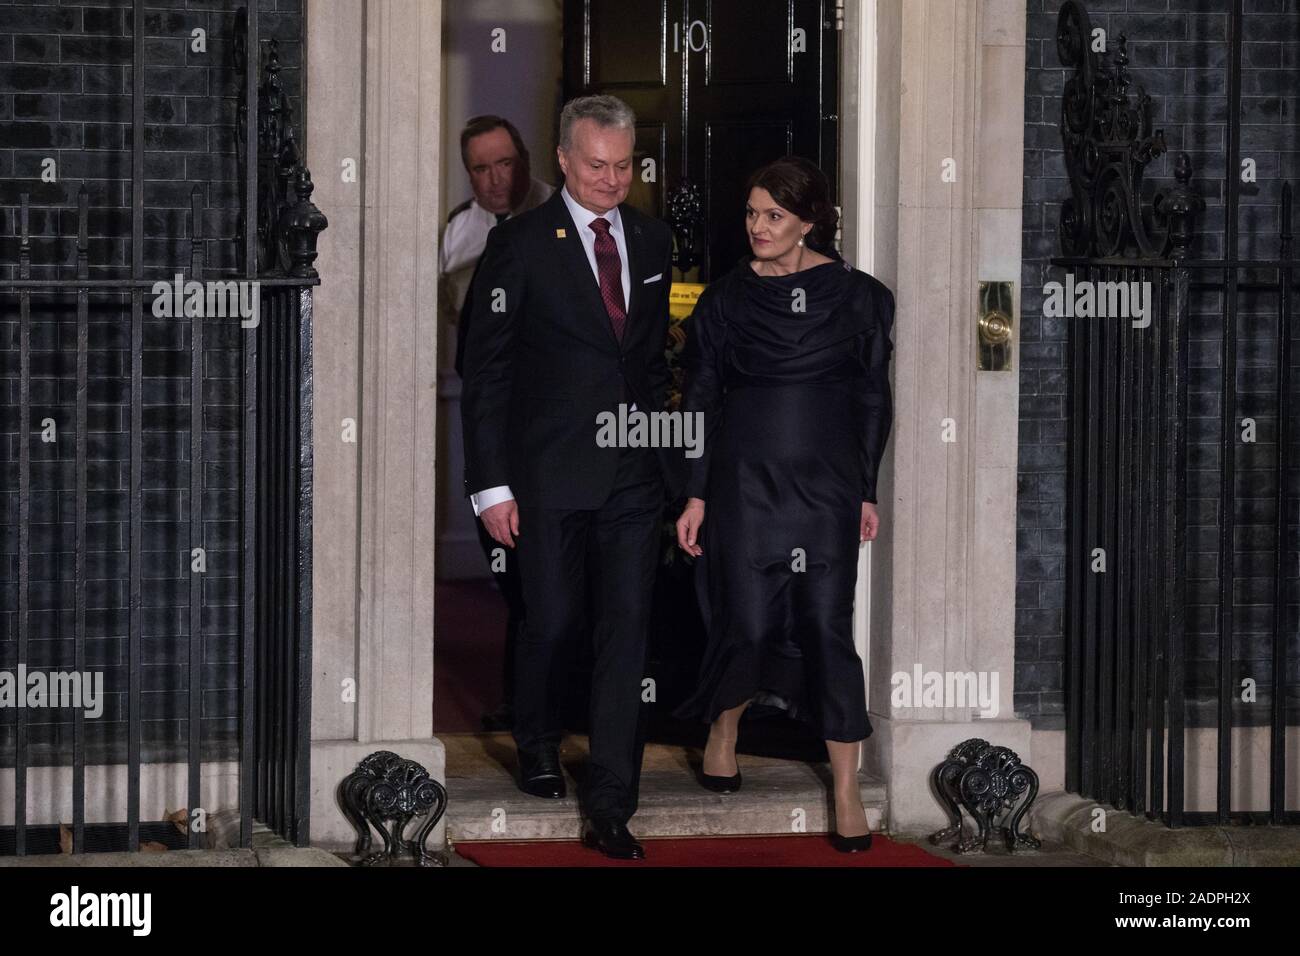 London, UK. 3 December, 2019. Gitanas Nausėda, President of Lithuania, leaves with his wife Diana Nausėdienė following a reception for NATO leaders at 10 Downing Street on the eve of the military alliance’s 70th anniversary summit at a luxury hotel near Watford. Credit: Mark Kerrison/Alamy Live News Stock Photo